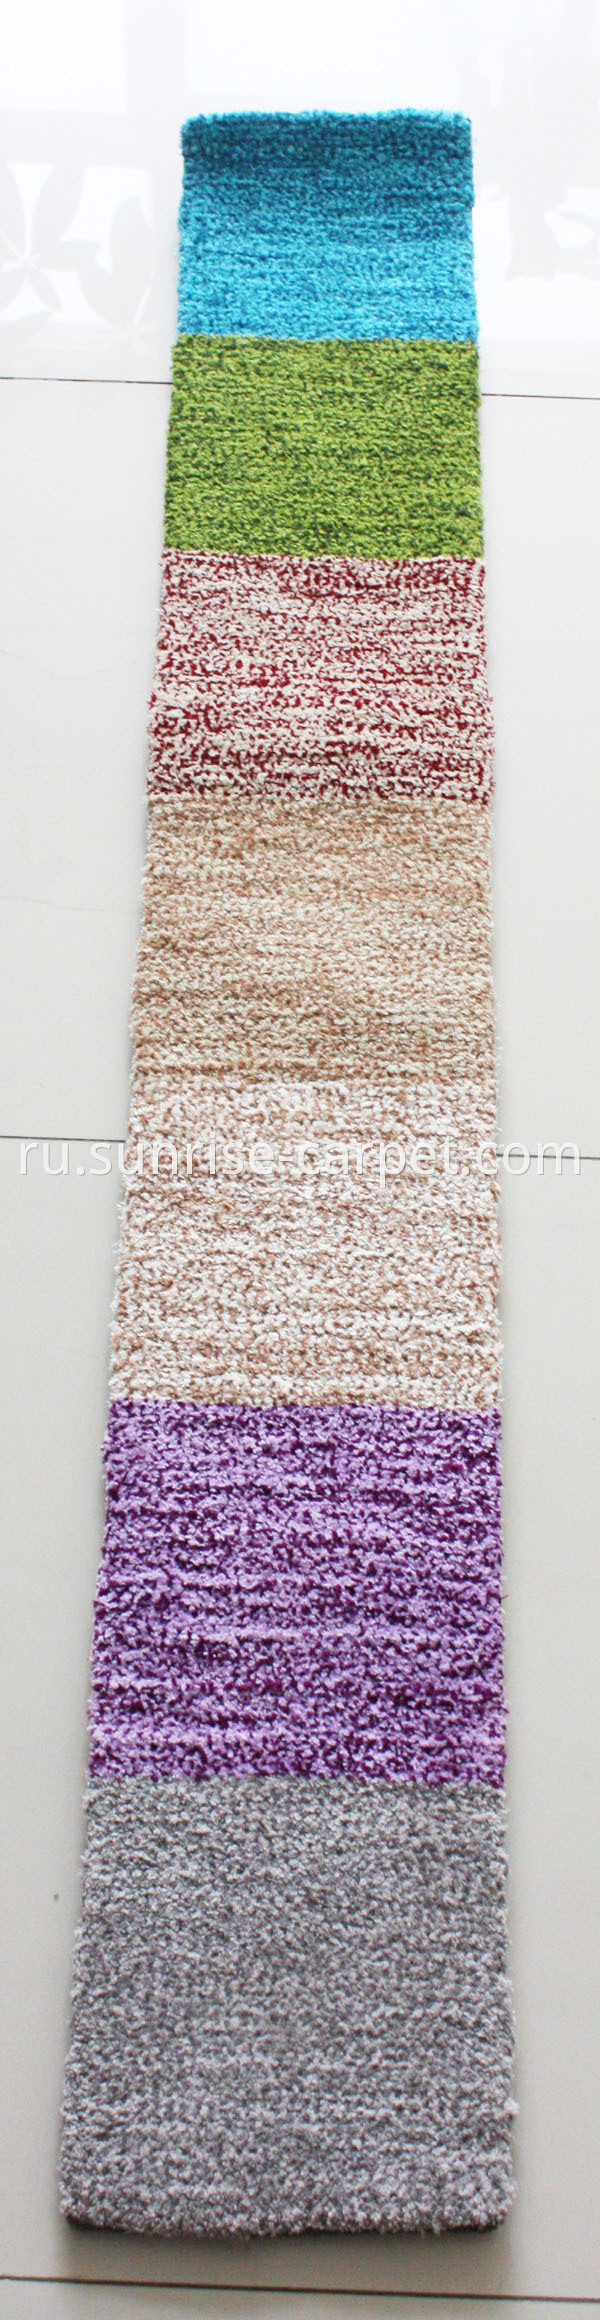 Microfiber Carpet with short pile color reference